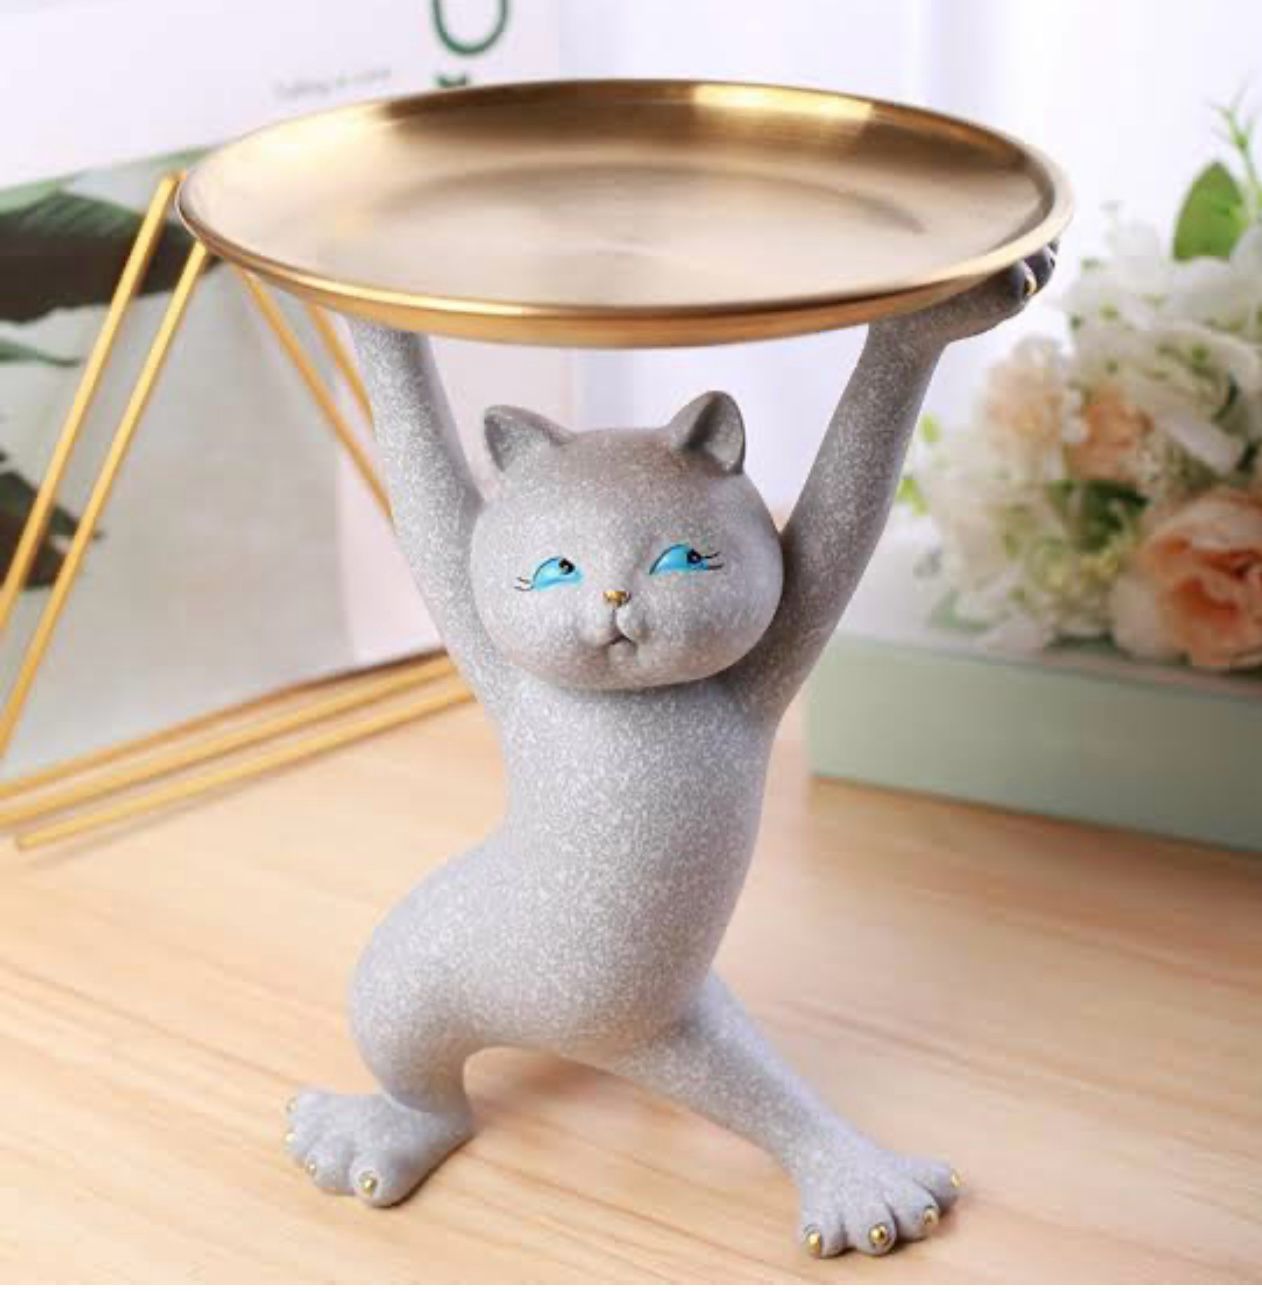 Cute Kitte Holding Tray